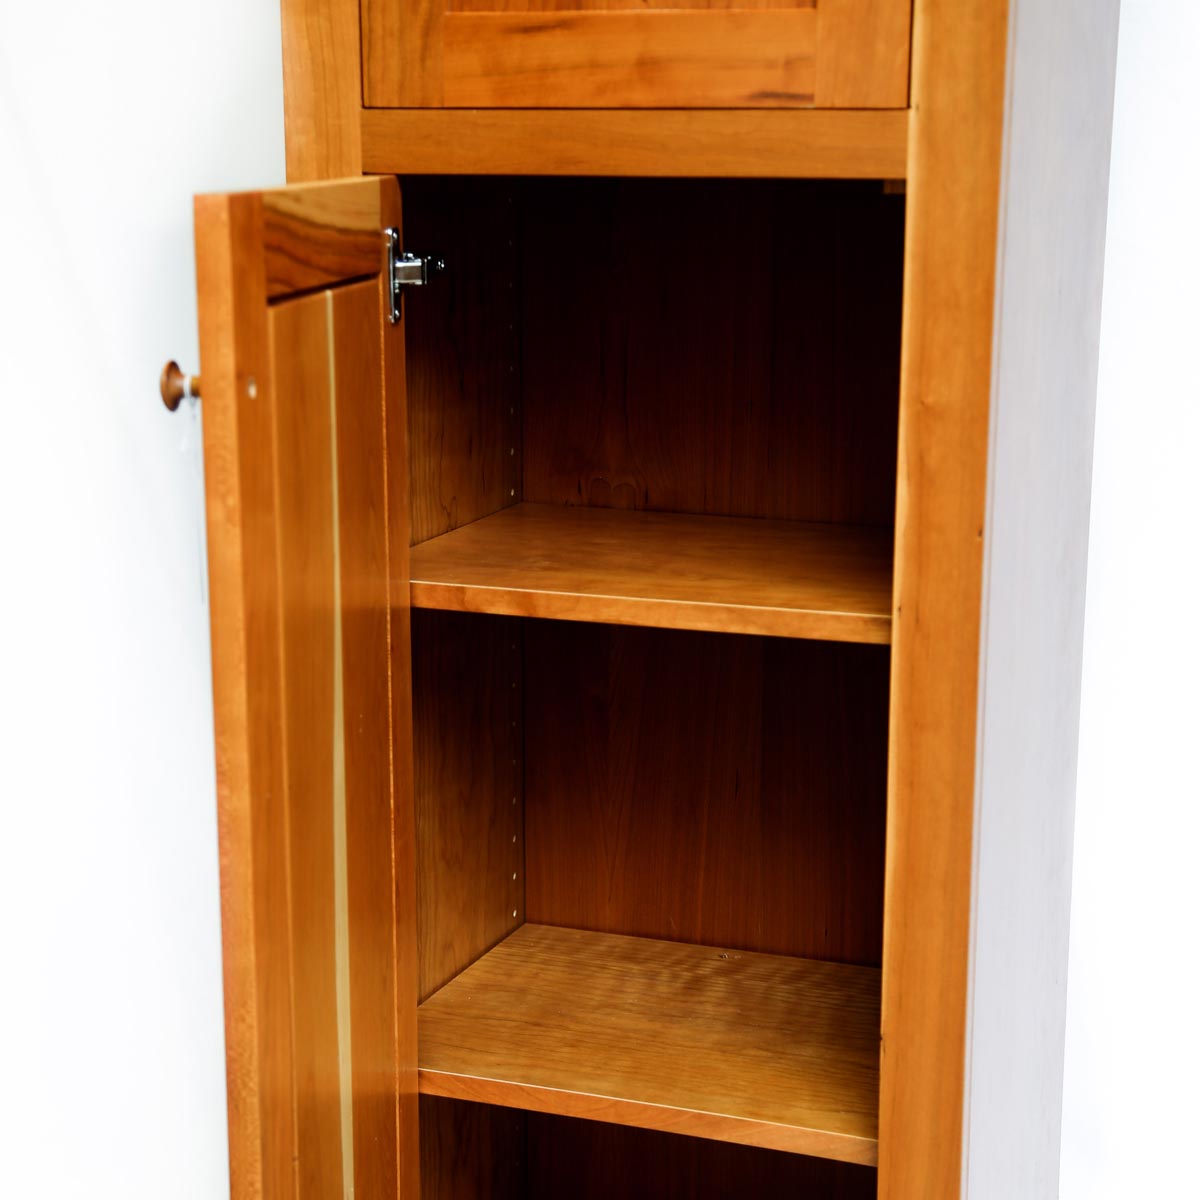 Open door of cherry chimney cupboard showing storage space and two shelves inside